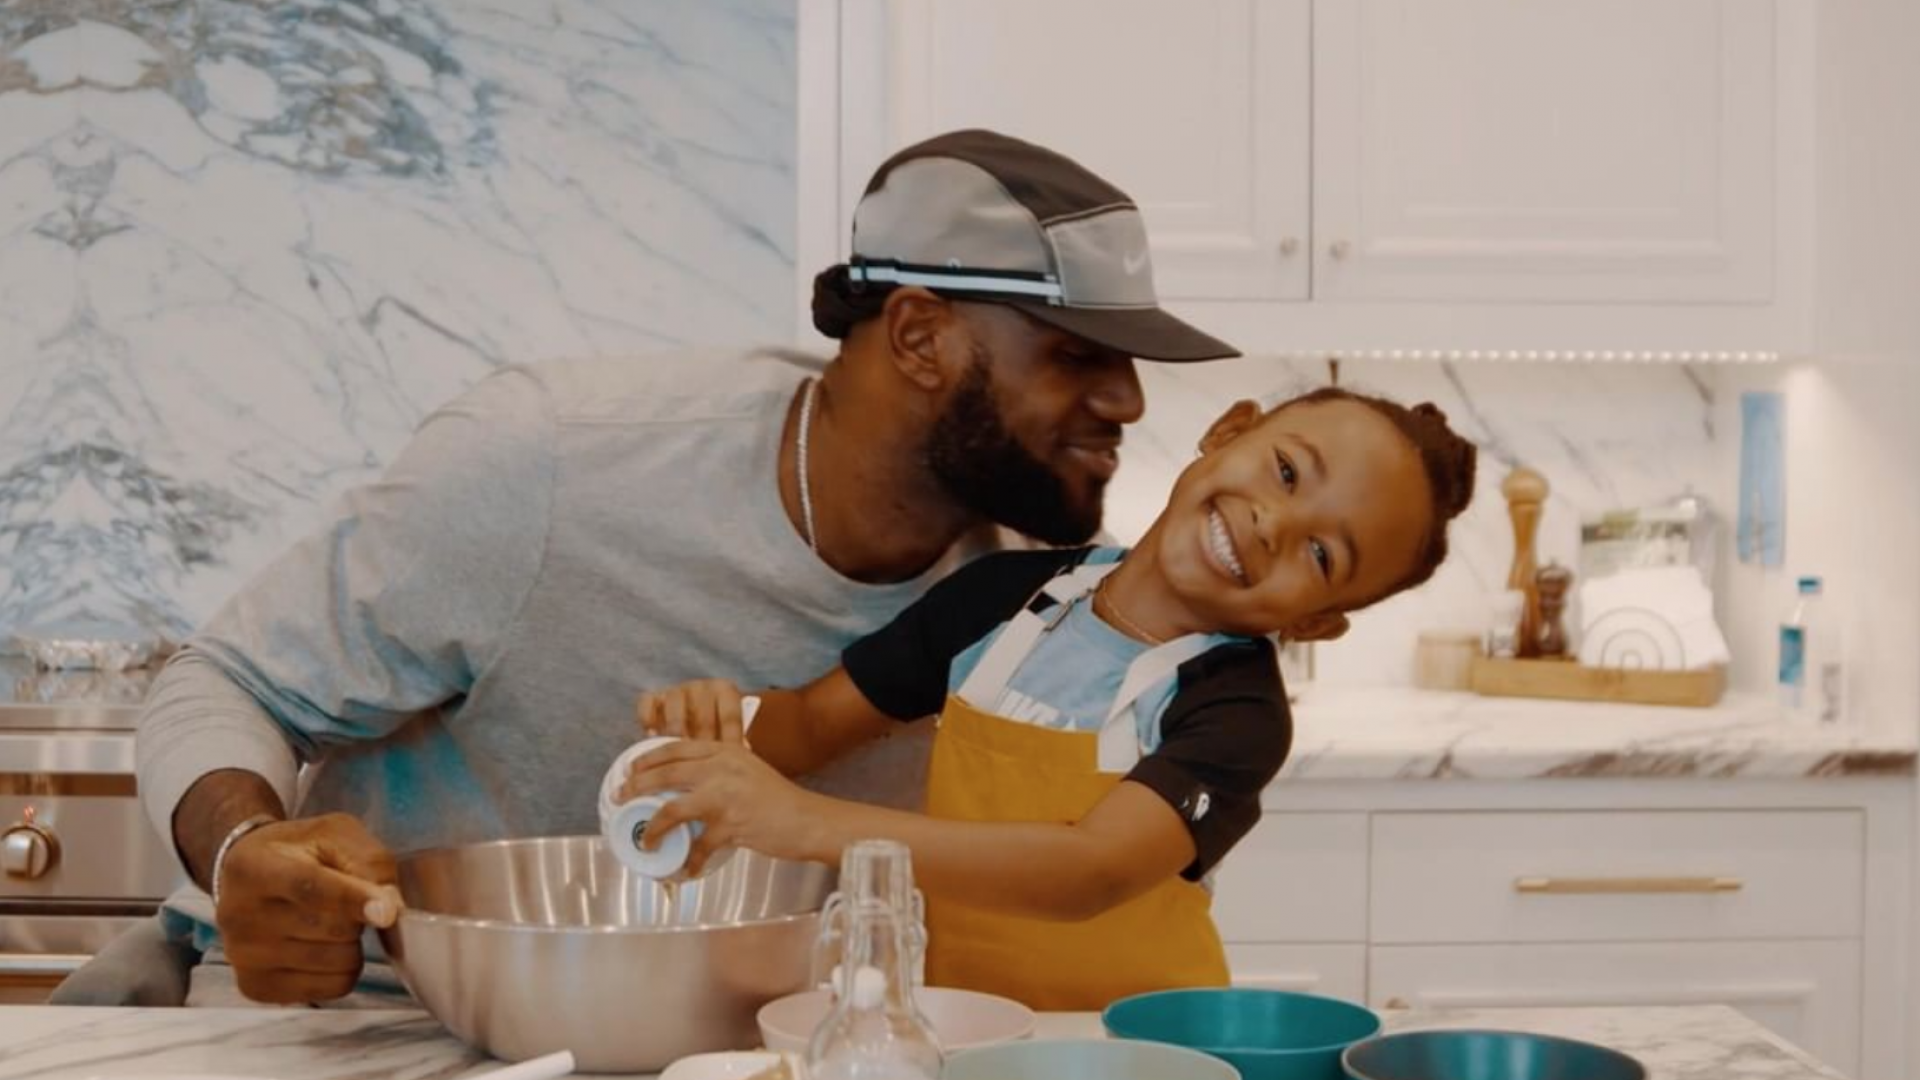 LeBron James Films The Cutest Cooking 